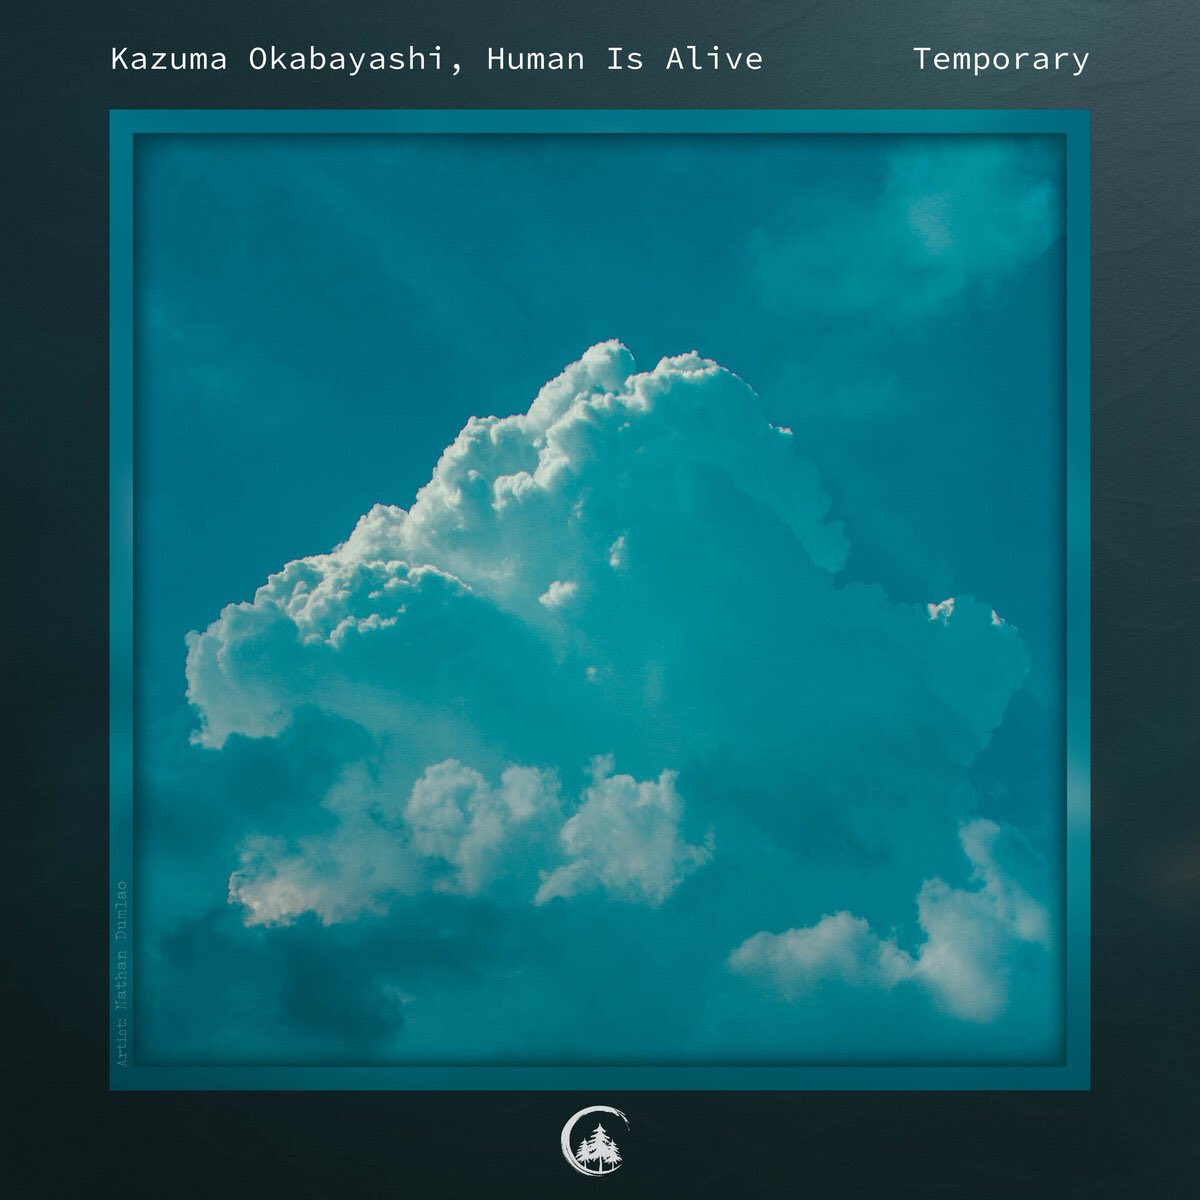 My new ambient EP “Temporary” with Kazuma Okabayashi @OKBYSKZM is out now on @ValleyVRecords ! ☁️ Including incredible reworks from Applefish @nikdavies_ and Man From Mars Link: vvr.fanlink.to/Temporary_